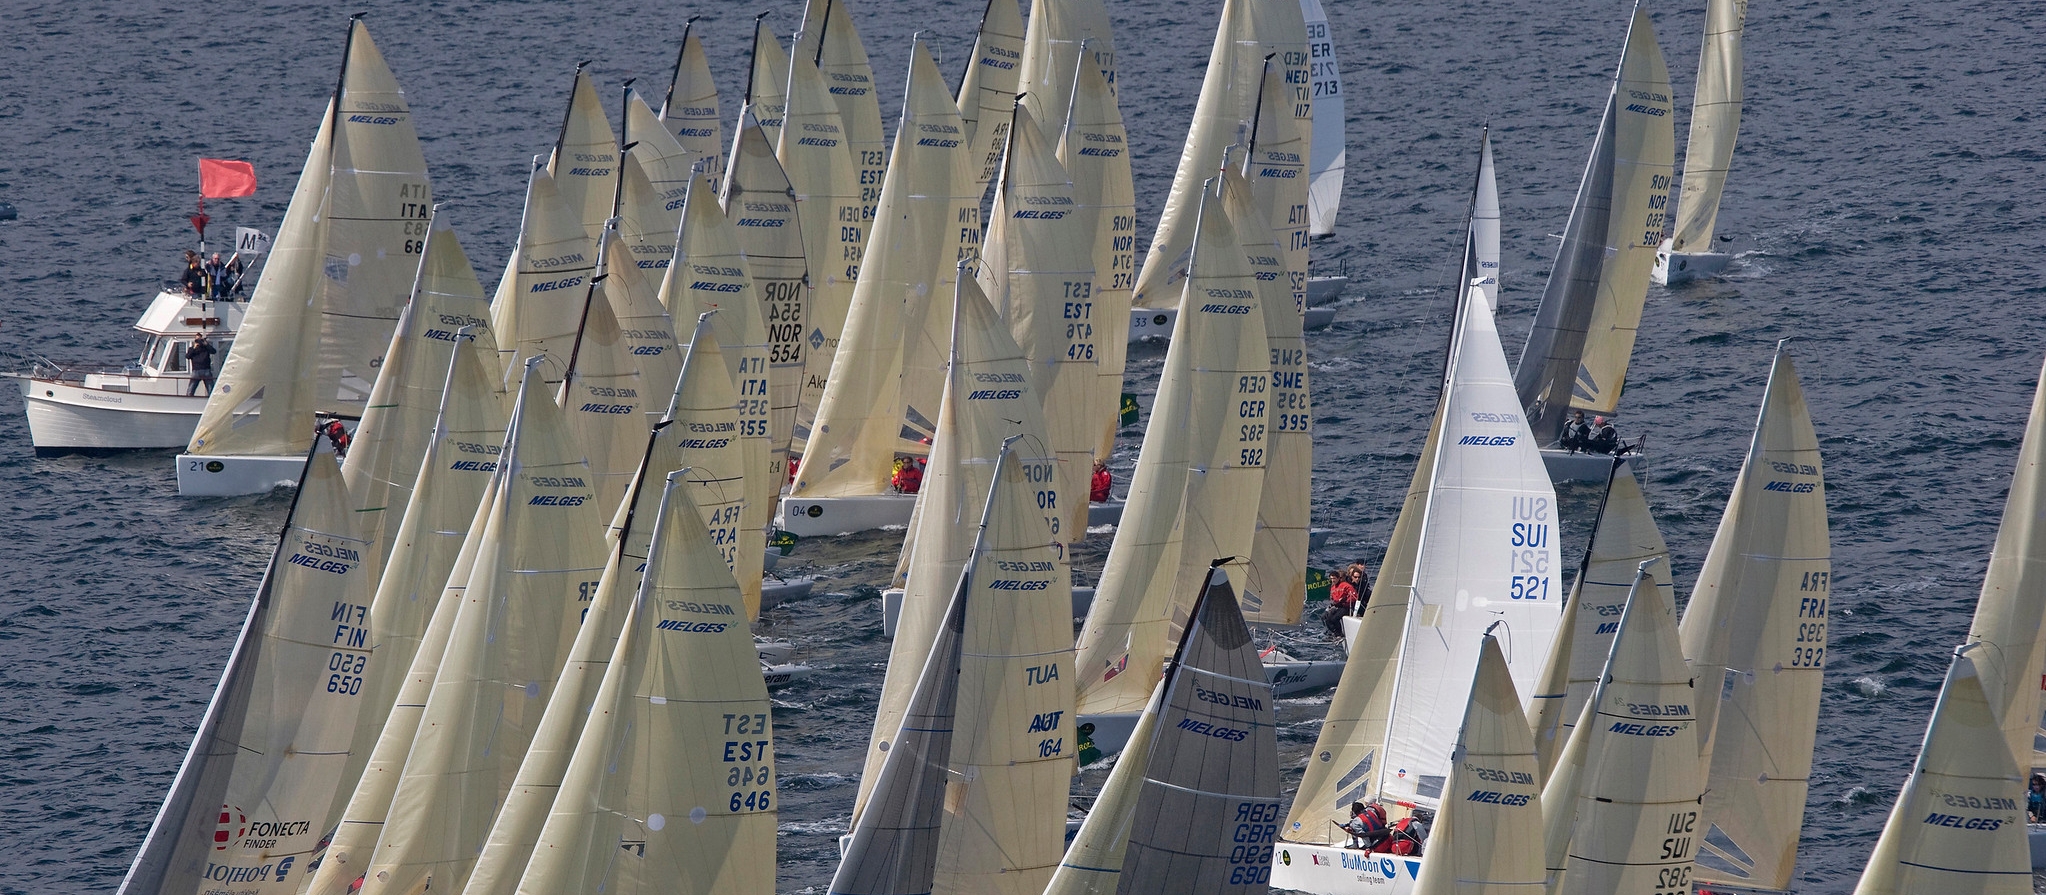 2007 Melges 24 European Championship held in association with Rolex Baltic Week in Neustadt, Germany